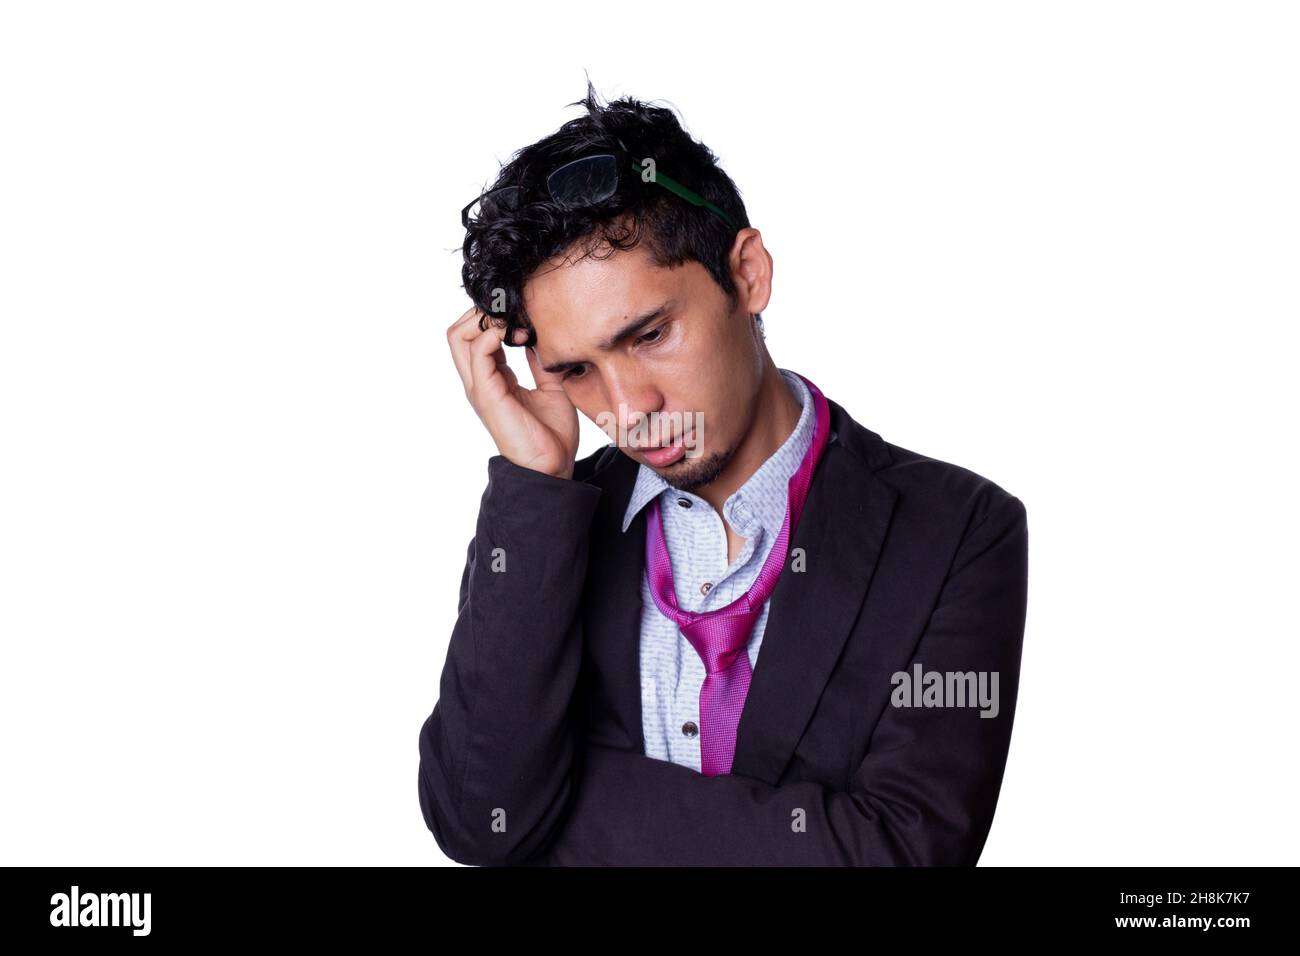 Businessman with a disheveled tie and deep in thought scratches his head while looking down. Young adult businessman isolated on all white background. Stock Photo